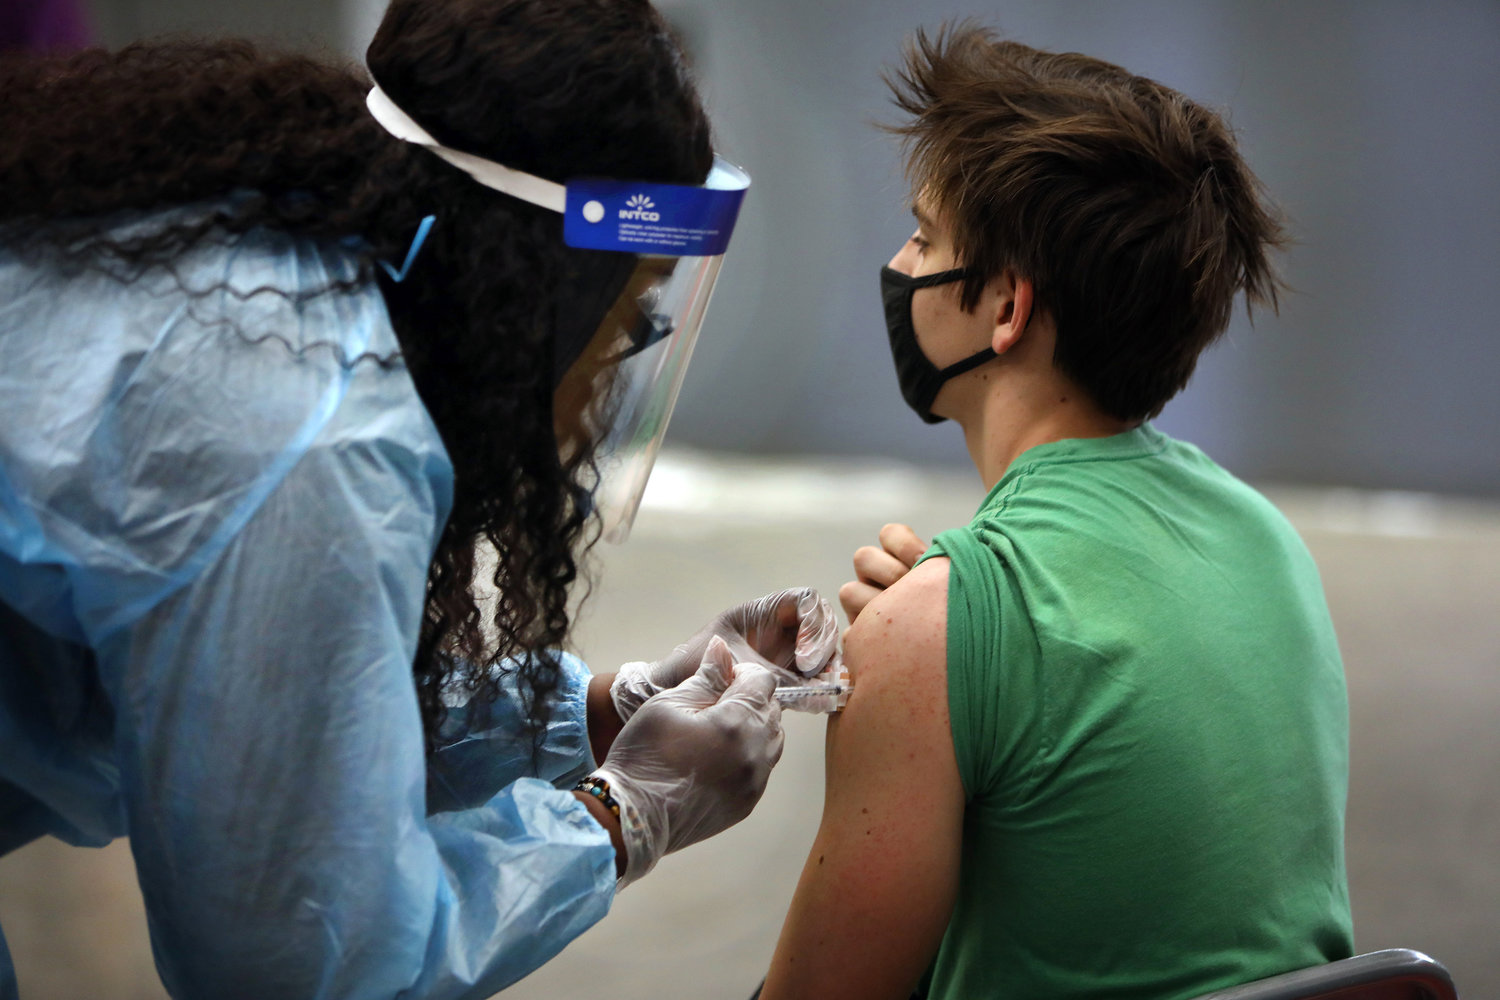 A nurse administers the COVID-19 vaccine to a student at San Pedro Senior High School on May 24, 2021, in Los Angeles. (Carolyn Cole/Los Angeles Times/TNS)